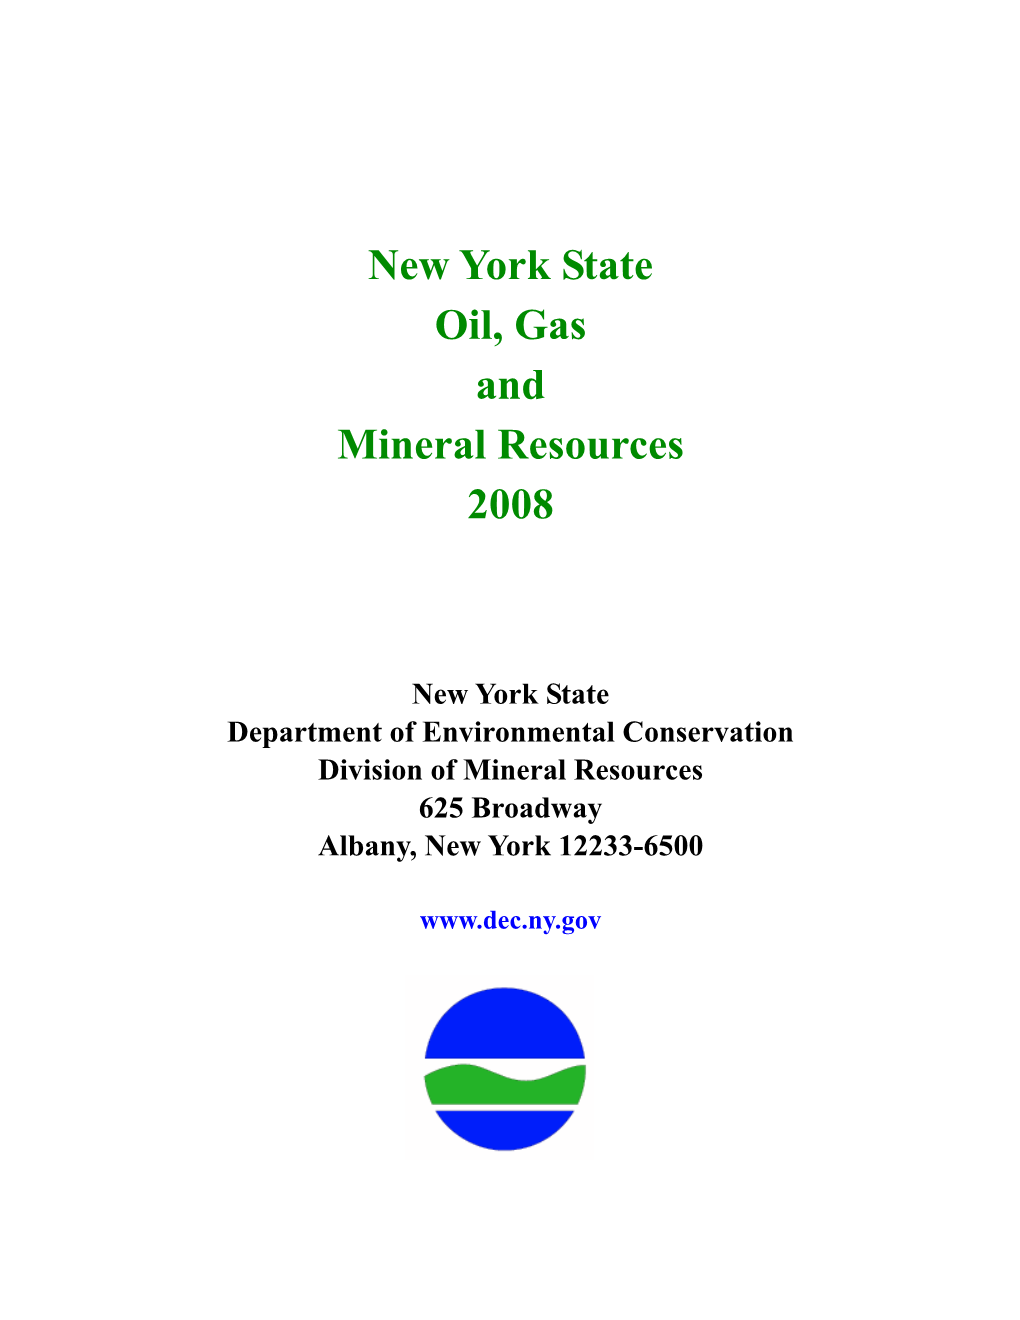 New York State Oil, Gas and Mineral Resources 2008